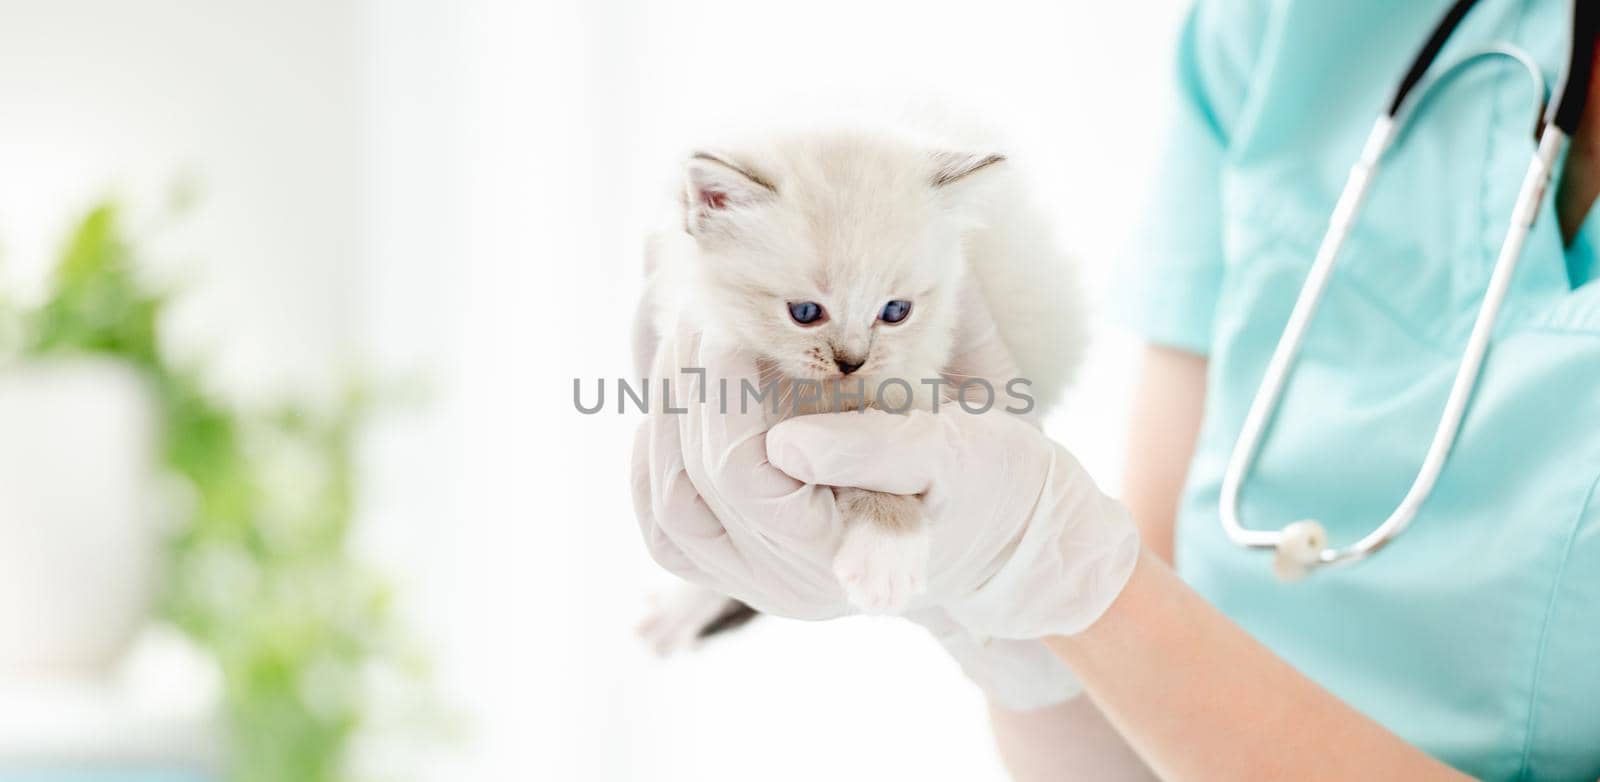 Adorable ragdoll kitten with beautiful blue eyes lying on hands of veterinarian at vet clinic. Woman animal doctor holding cute purebred fluffy kitty during medical care examining